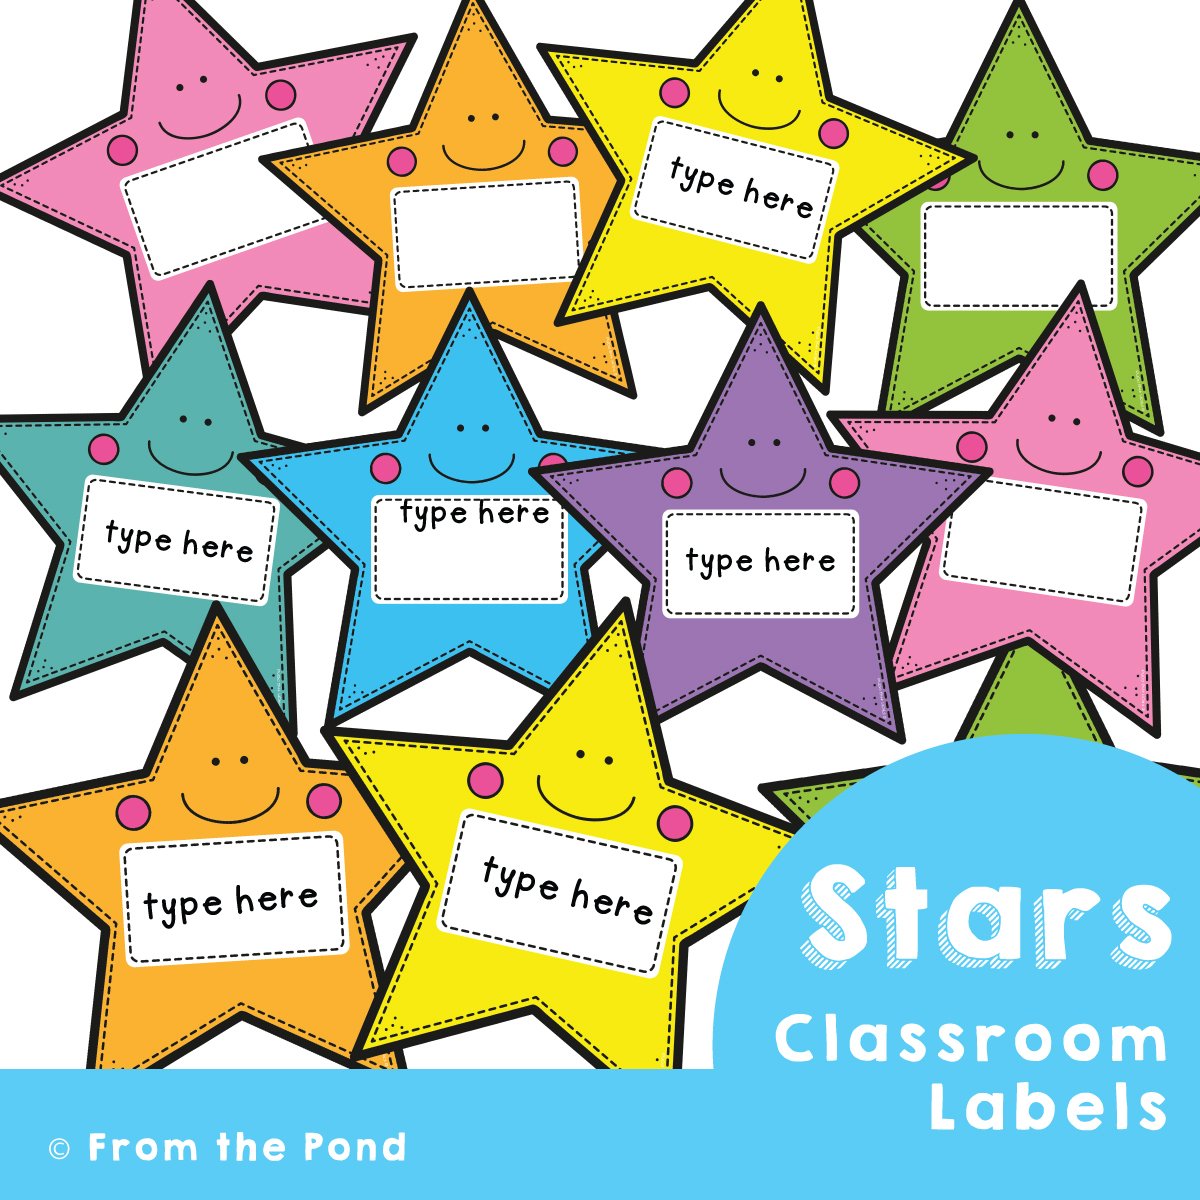 Star Labels